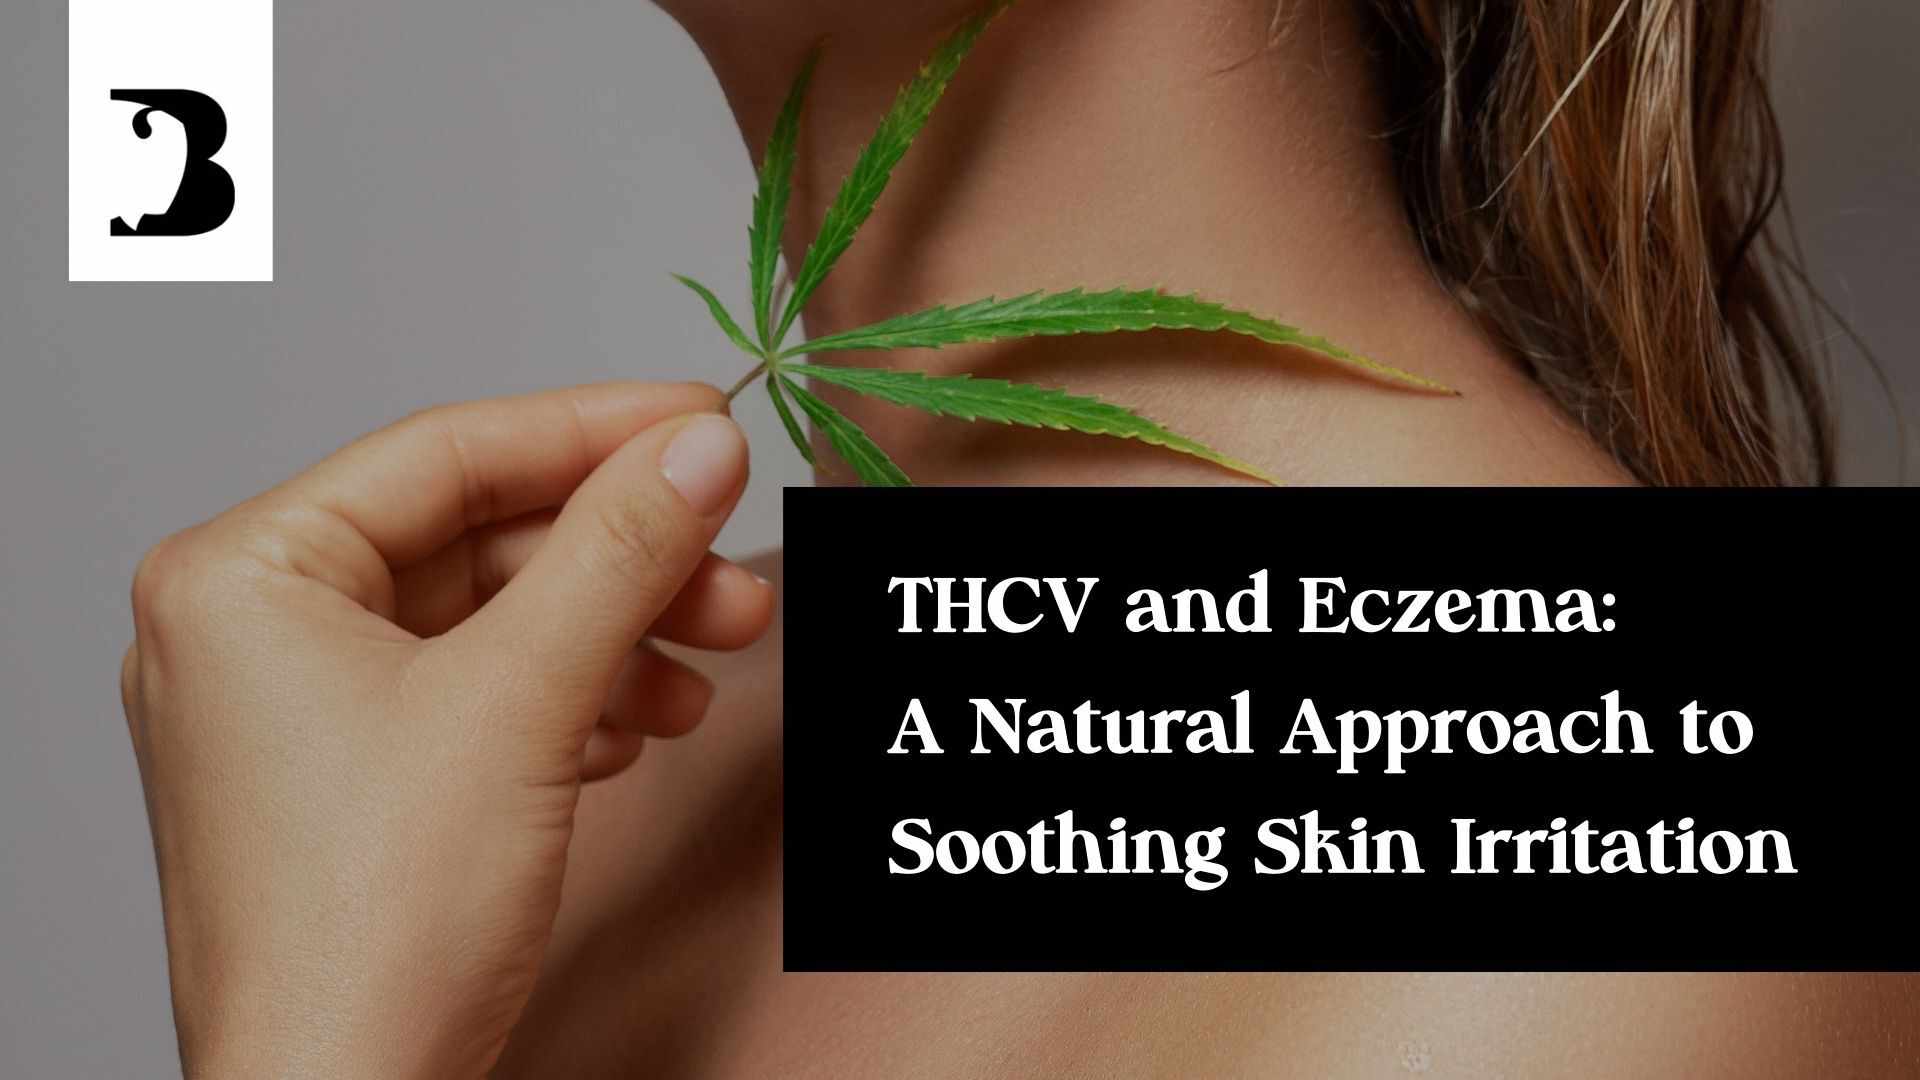 THCV and Eczema A Natural Approach to Soothing Skin Irritation